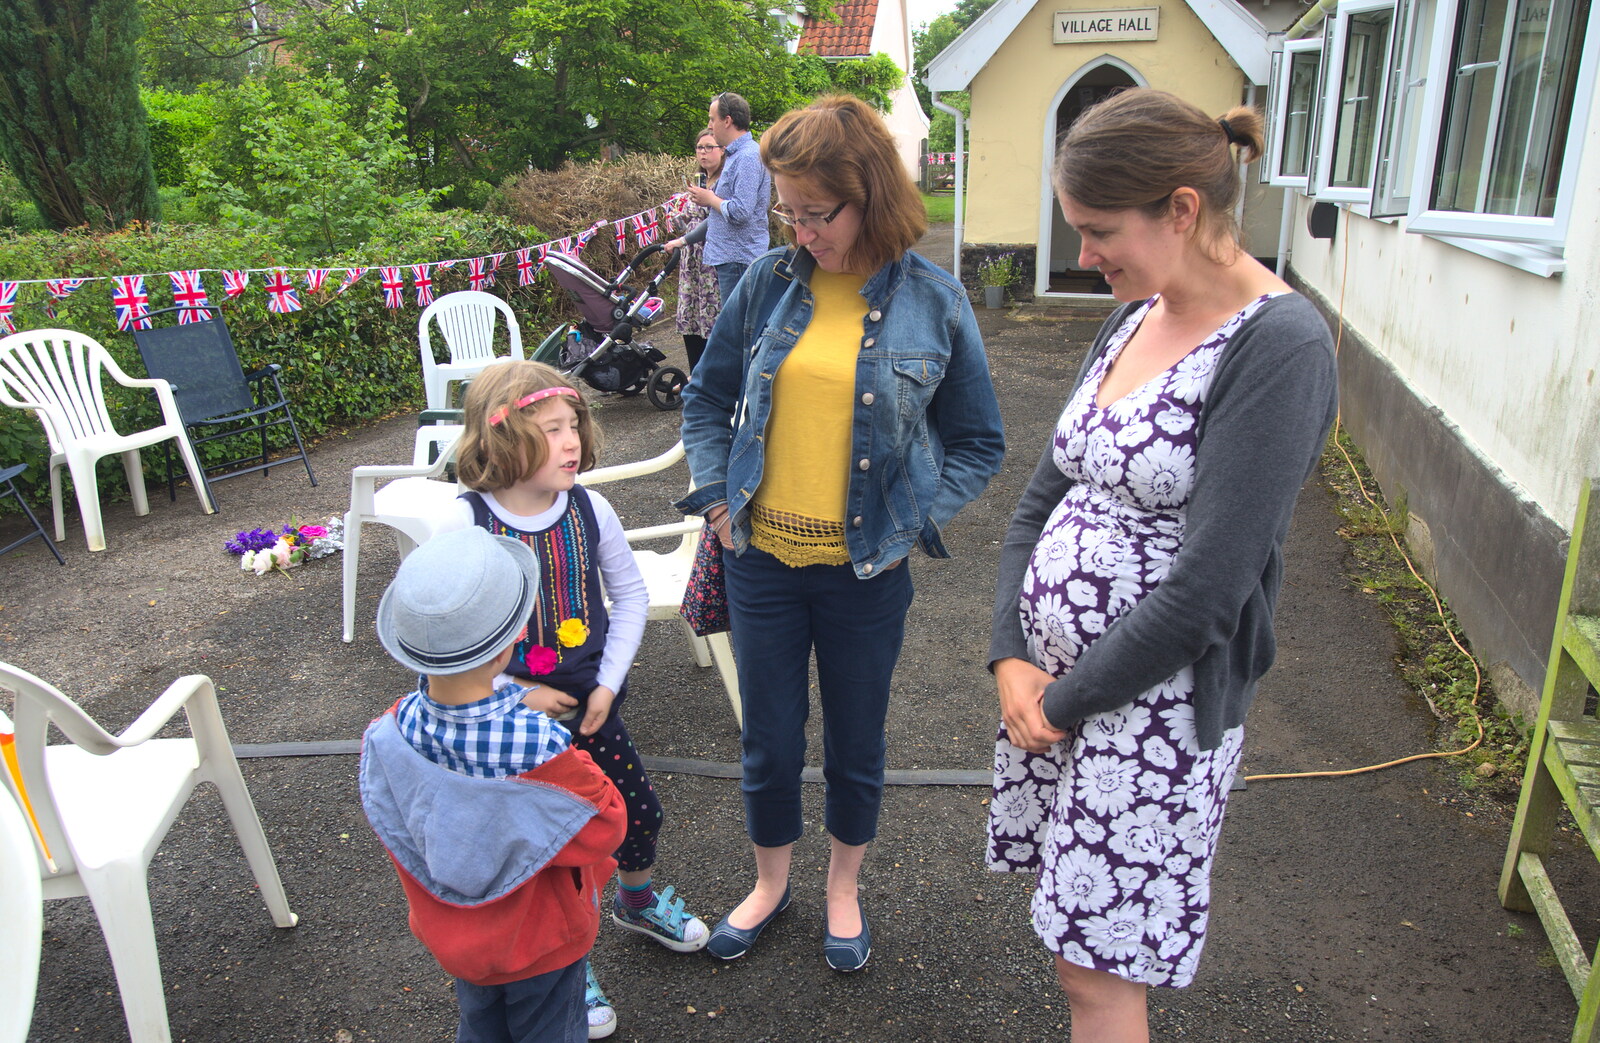 Suzanne and Isobel chat to Harry and Amelia from The Queen's Village Hall Birthday, Brome, Suffolk - 12th June 2016